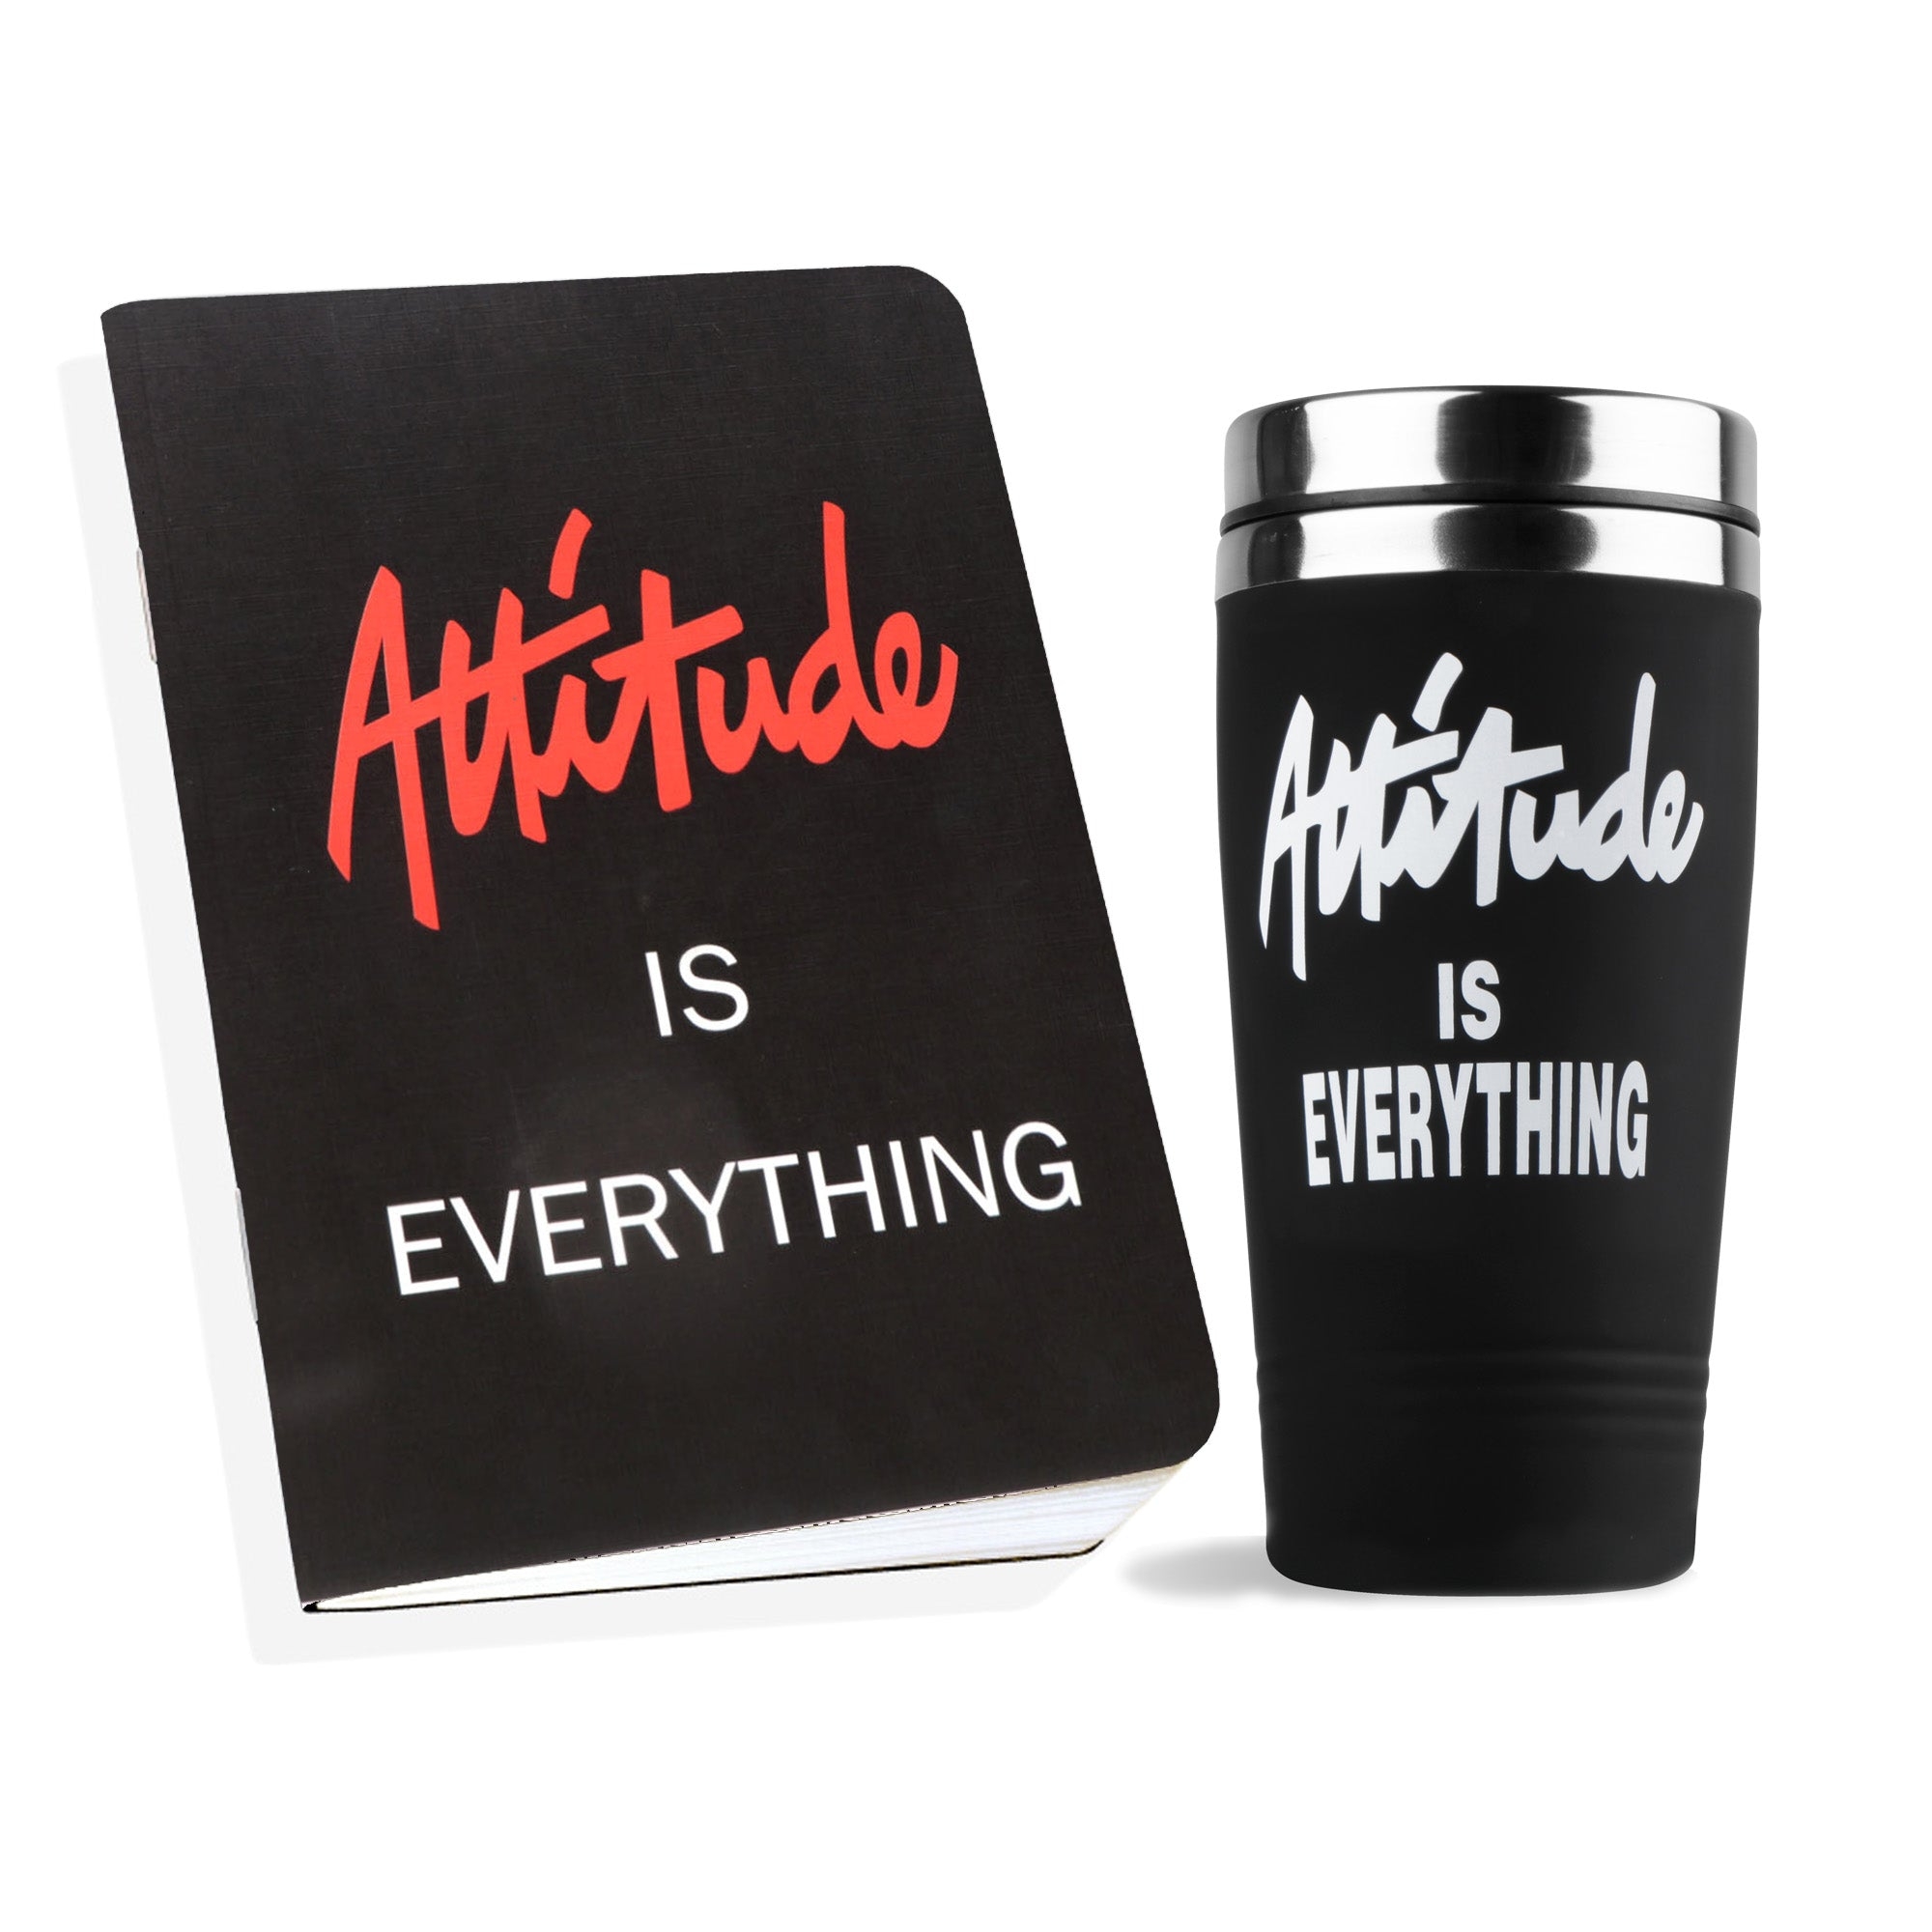 Archies | Archies Printed Stainless Steel Sipper/Shaker  & Notebook combo with Corporate Quote Theme